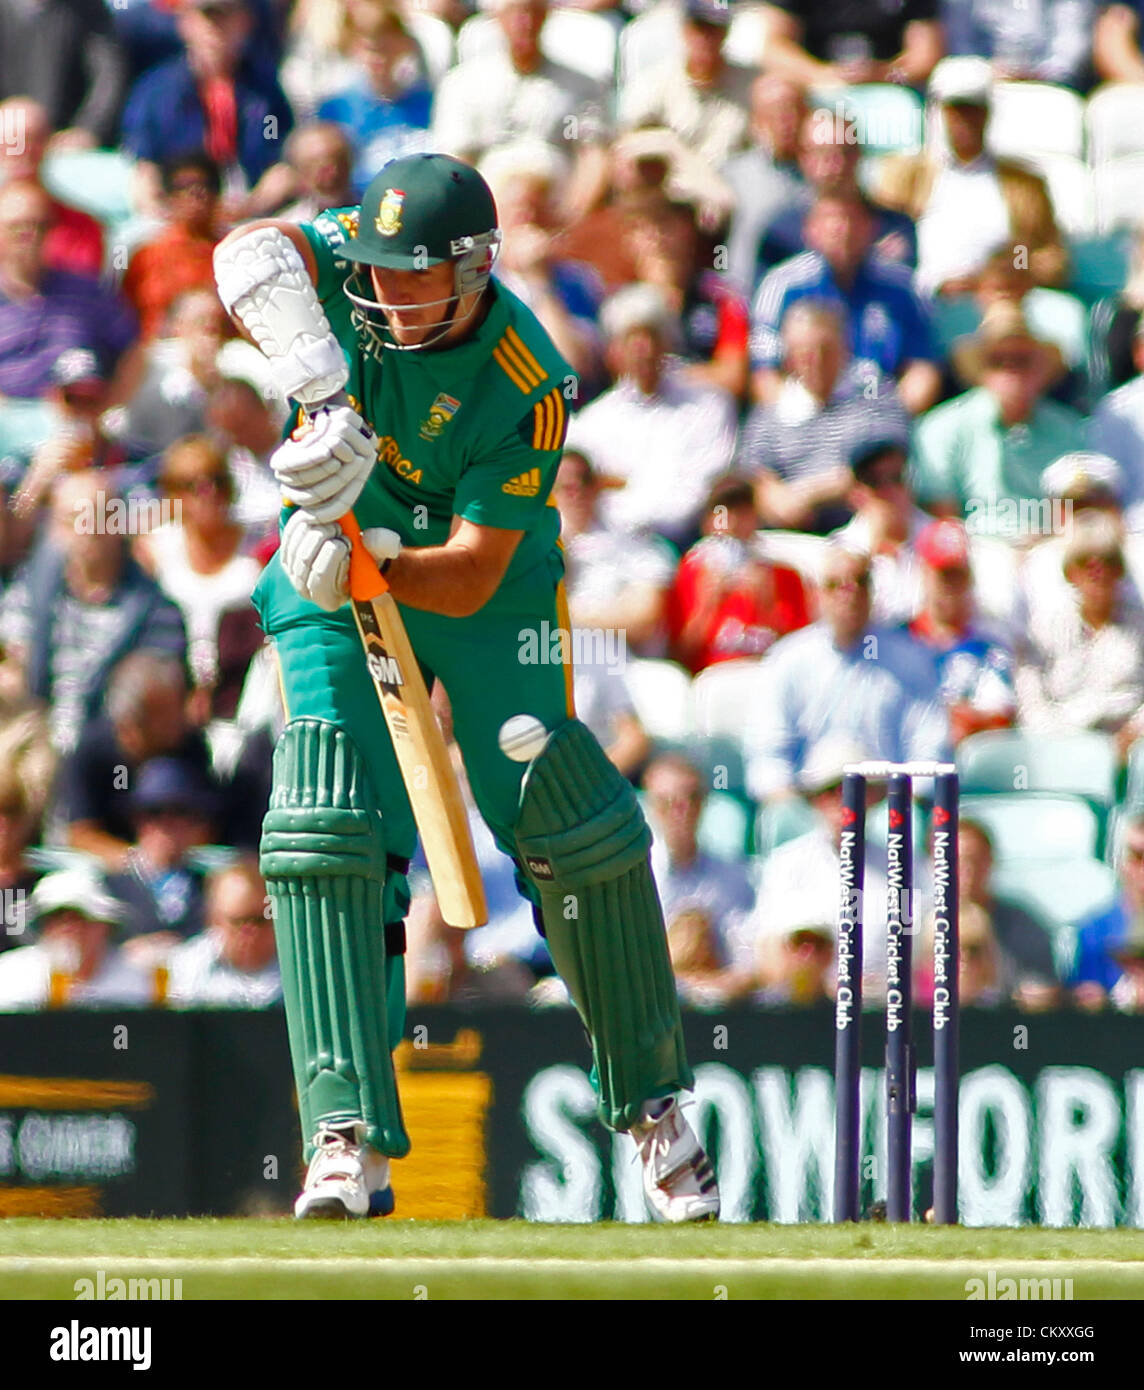 London, UK. Friday 31st August 2012. South Africa's Graeme Smith batting during the 3rd Nat West one day international cricket match between  England and South Africa and played at The Kia Oval Cricket Ground. Stock Photo